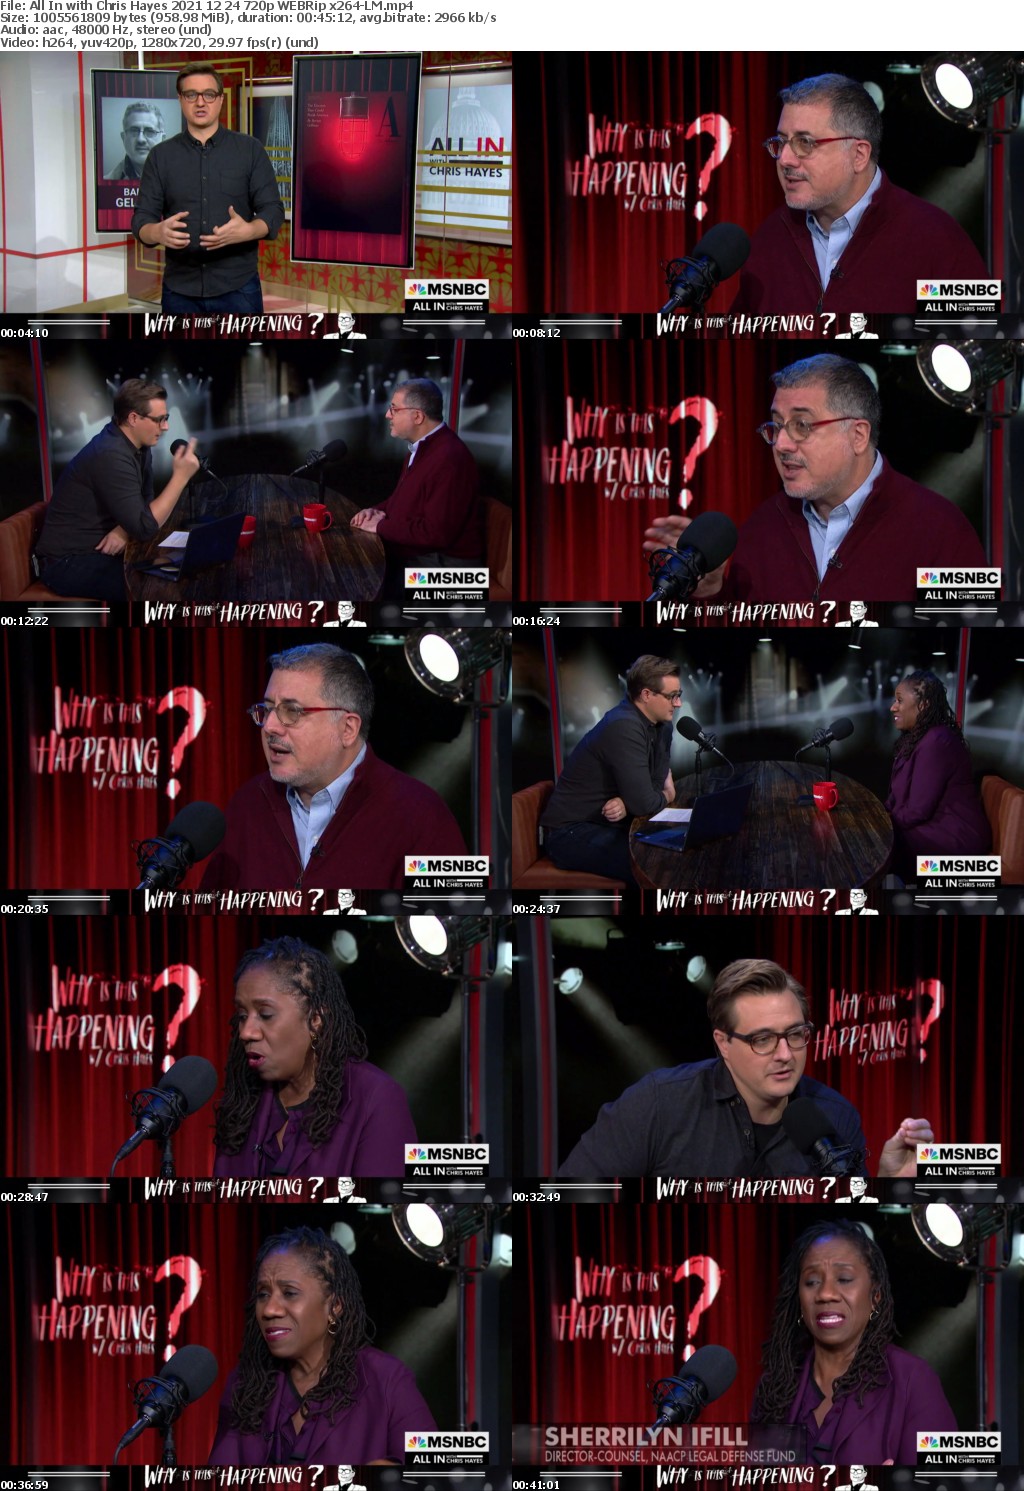 All In with Chris Hayes 2021 12 24 720p WEBRip x264-LM